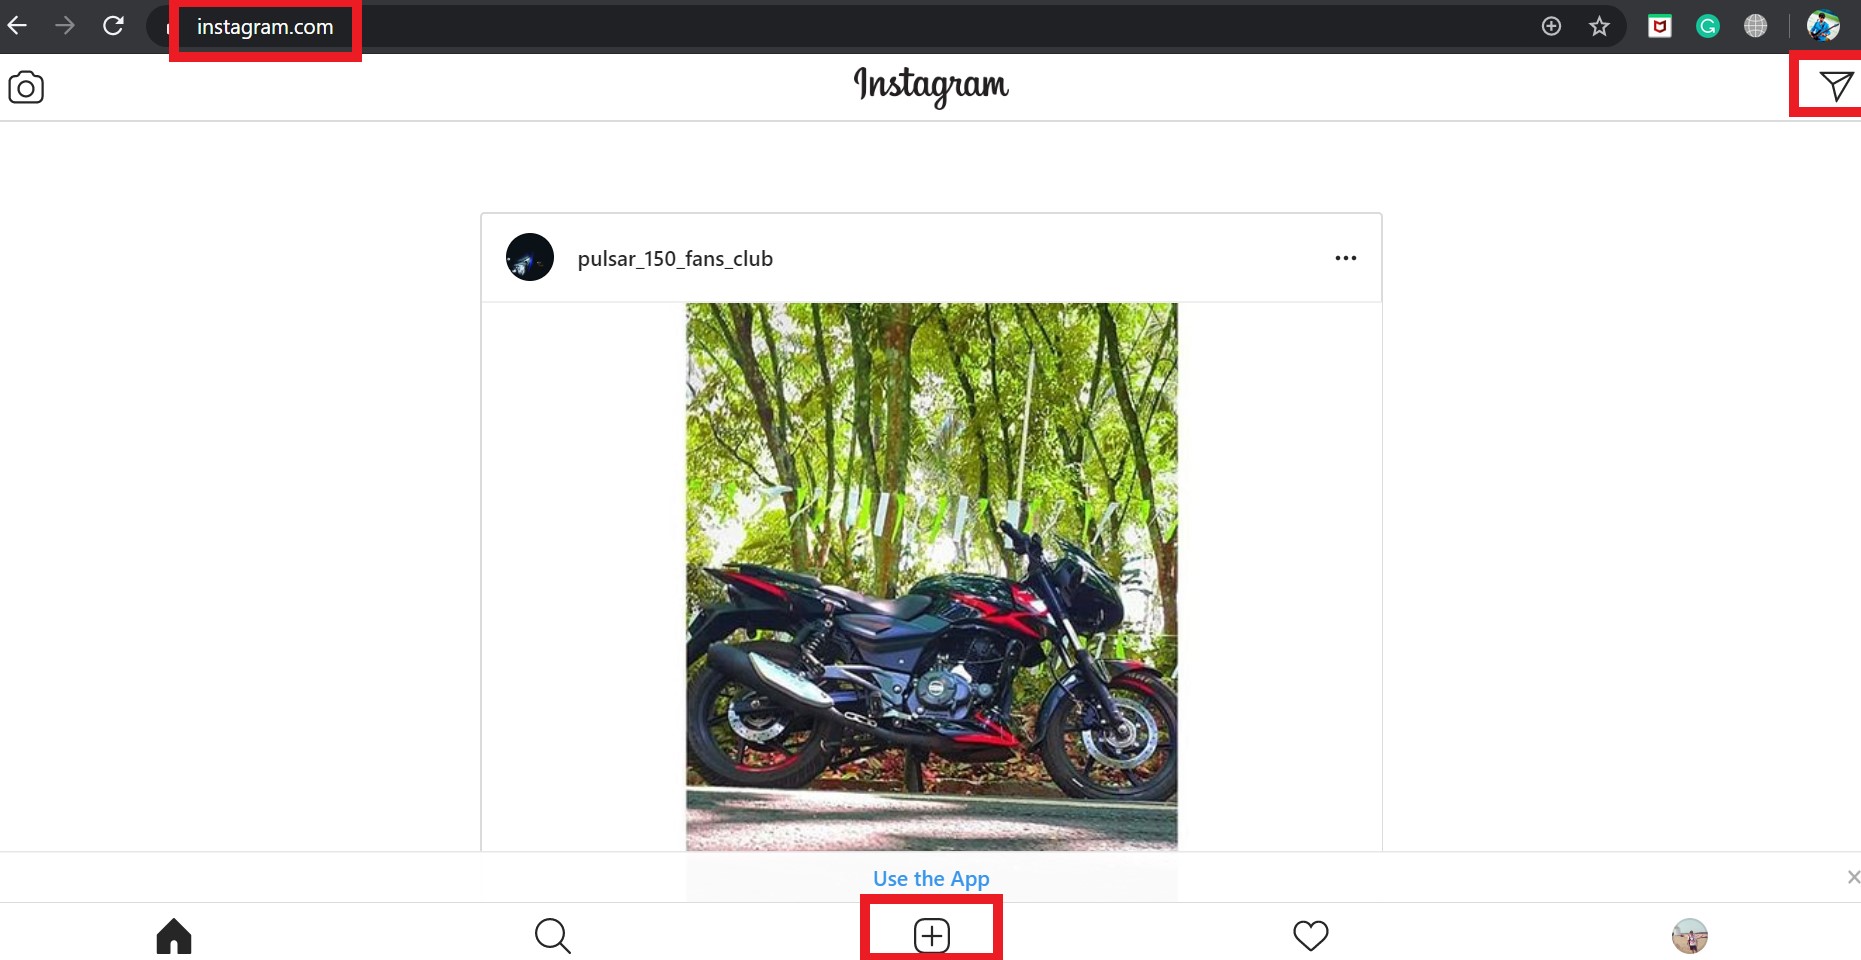 Send Instagram DMs and Upload Photos from a PC